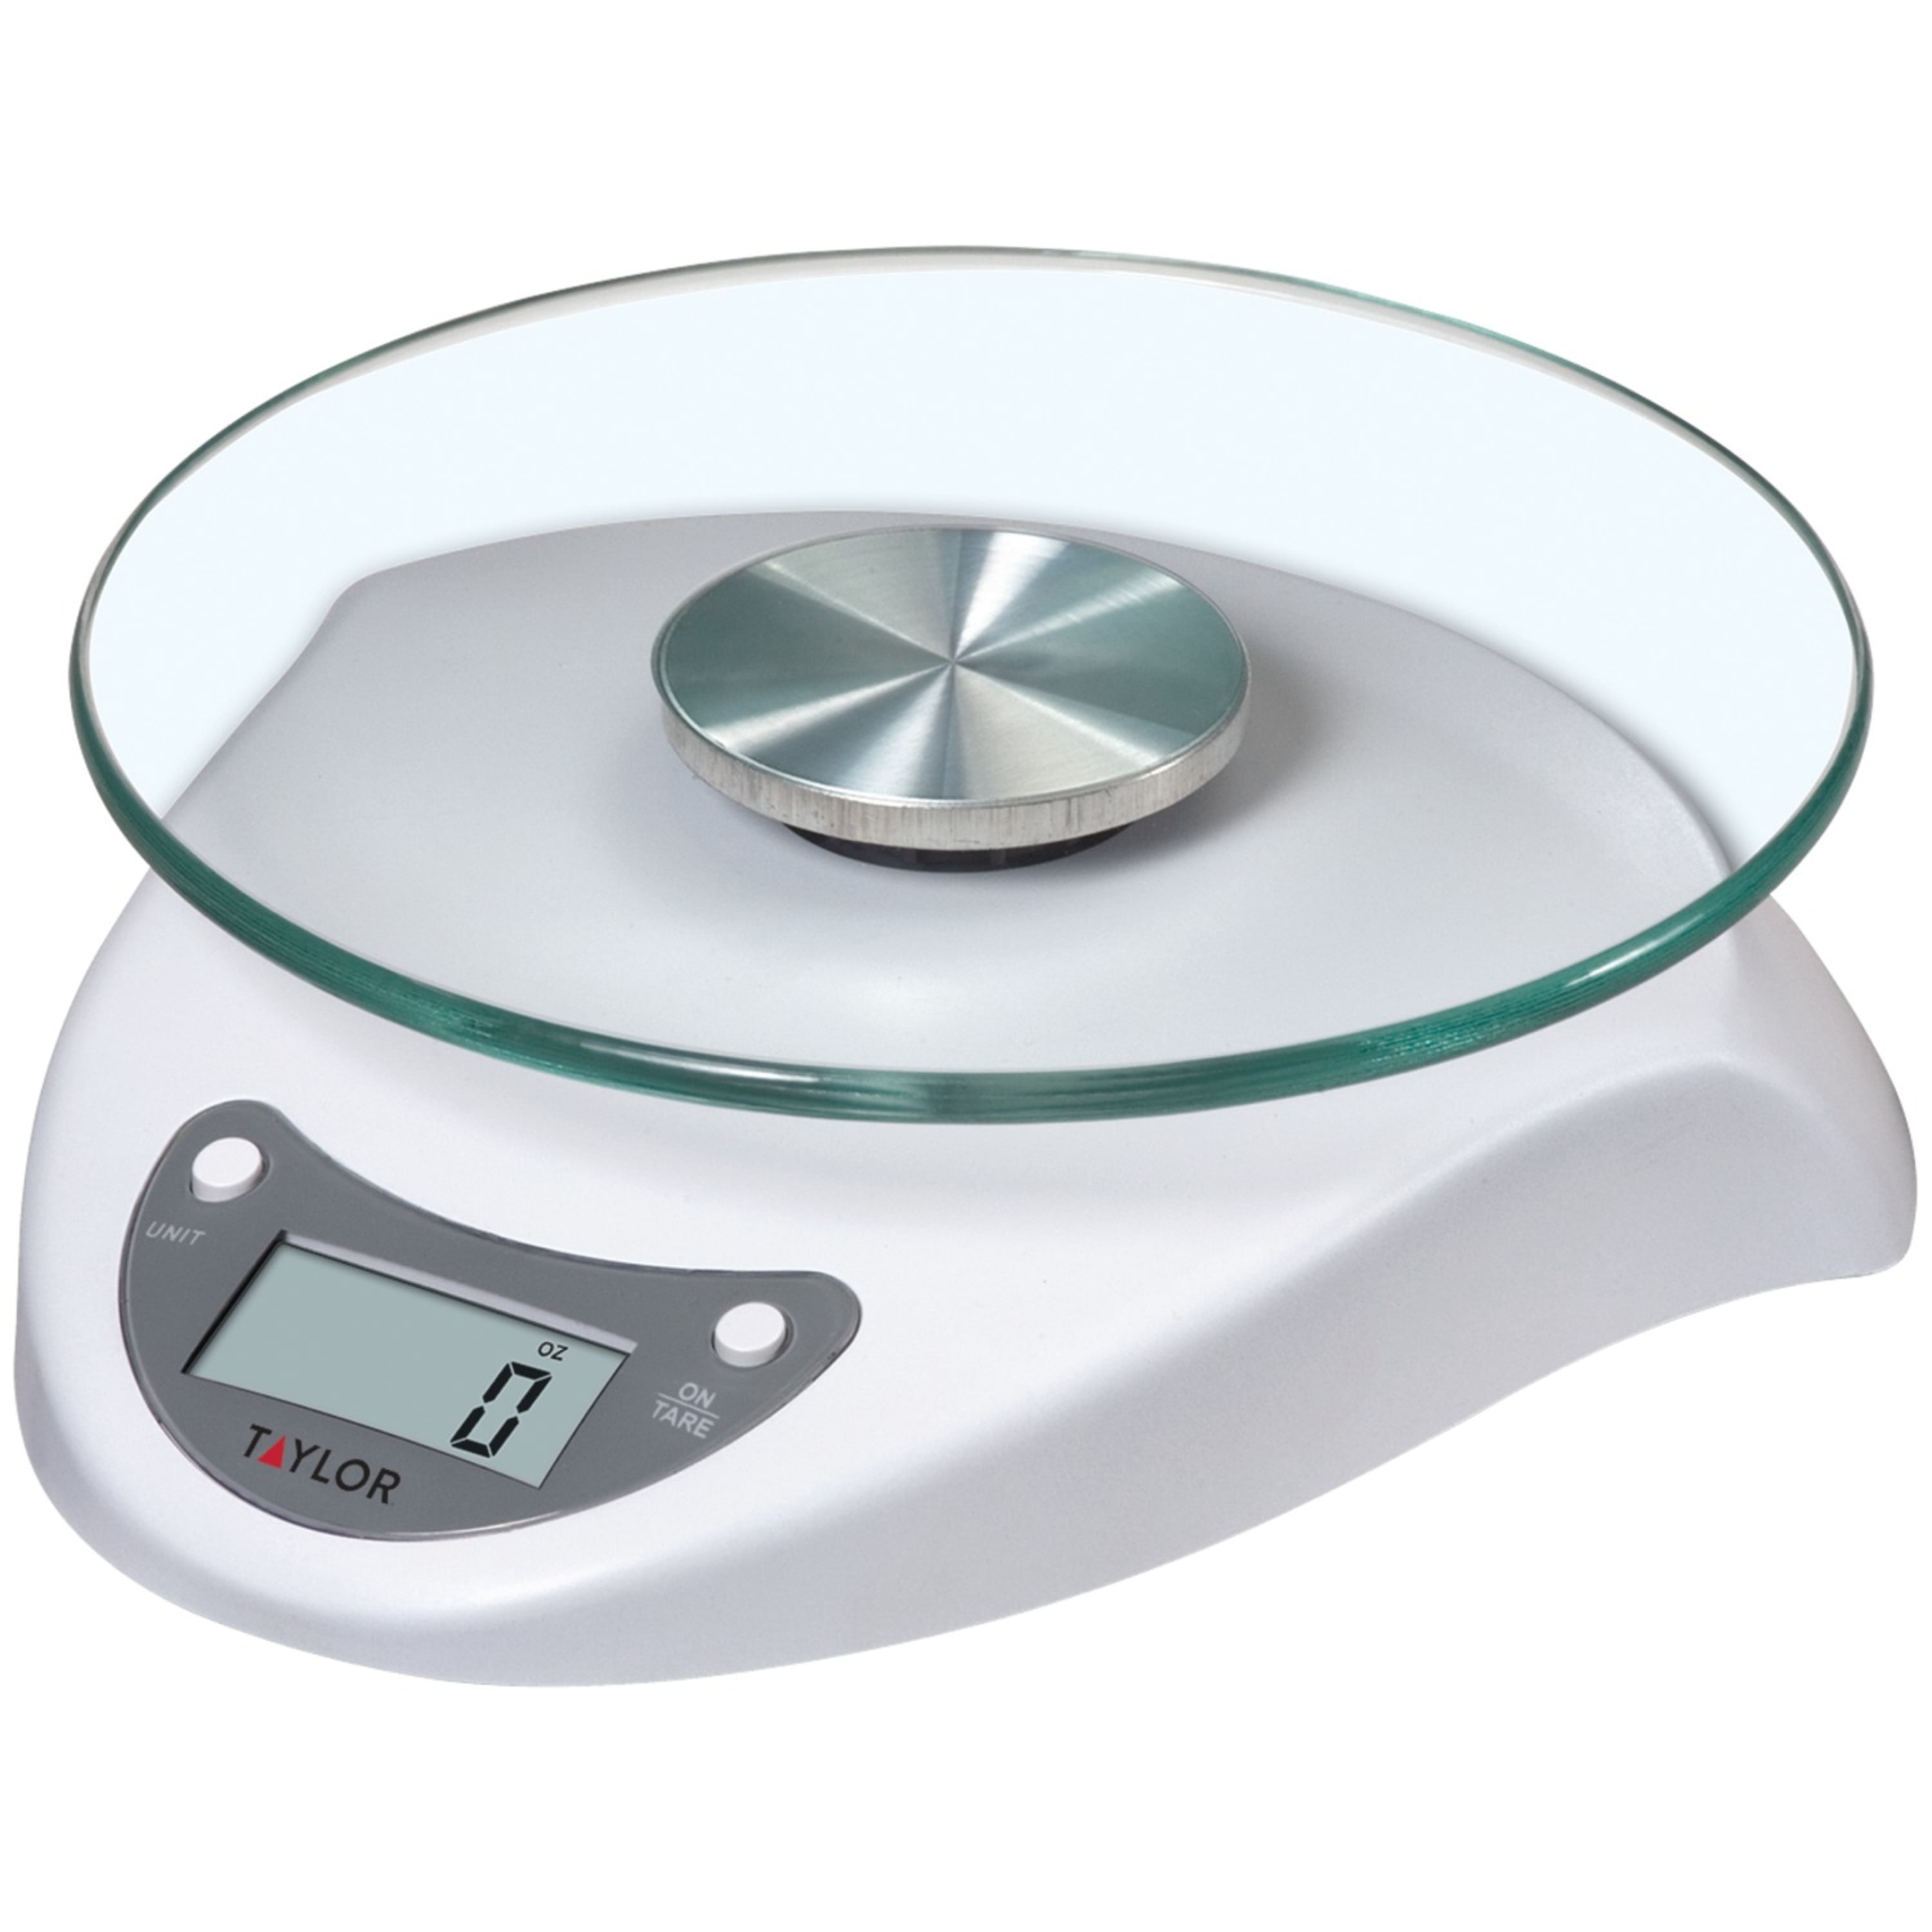 Round SILVER Digital Glass KITCHEN SCALE Touch Electronic LCD Weighing Postal 